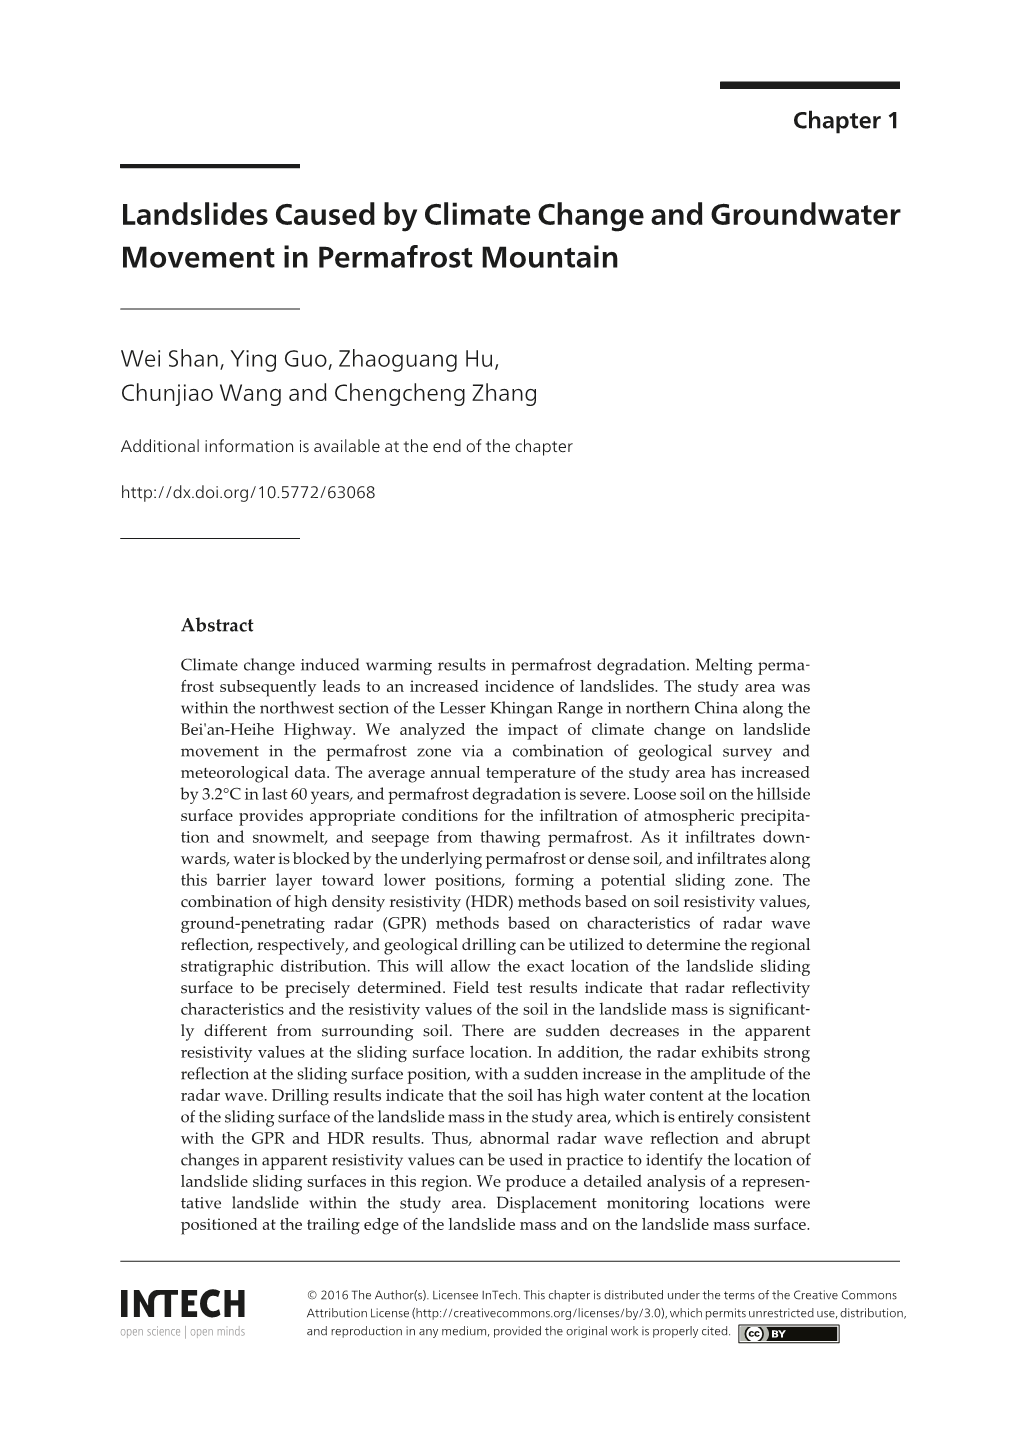 Landslides Caused by Climate Change and Groundwater Movement in Permafrost Mountain